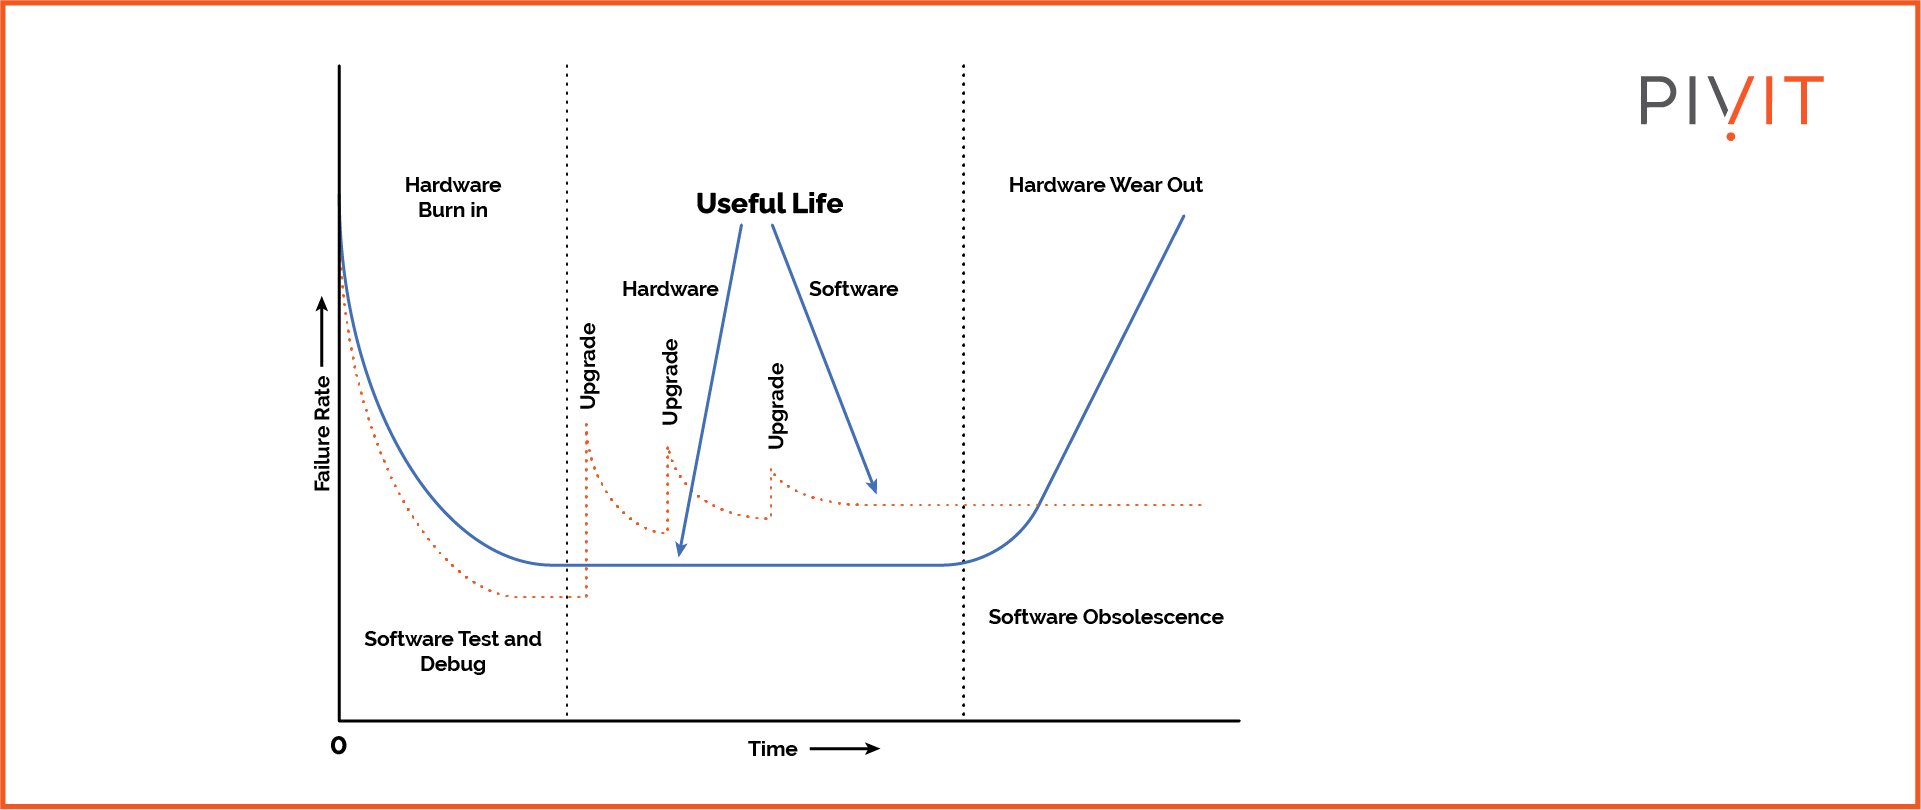 Bathtub curve depicting the hardware and software lifetimes of HPC systems